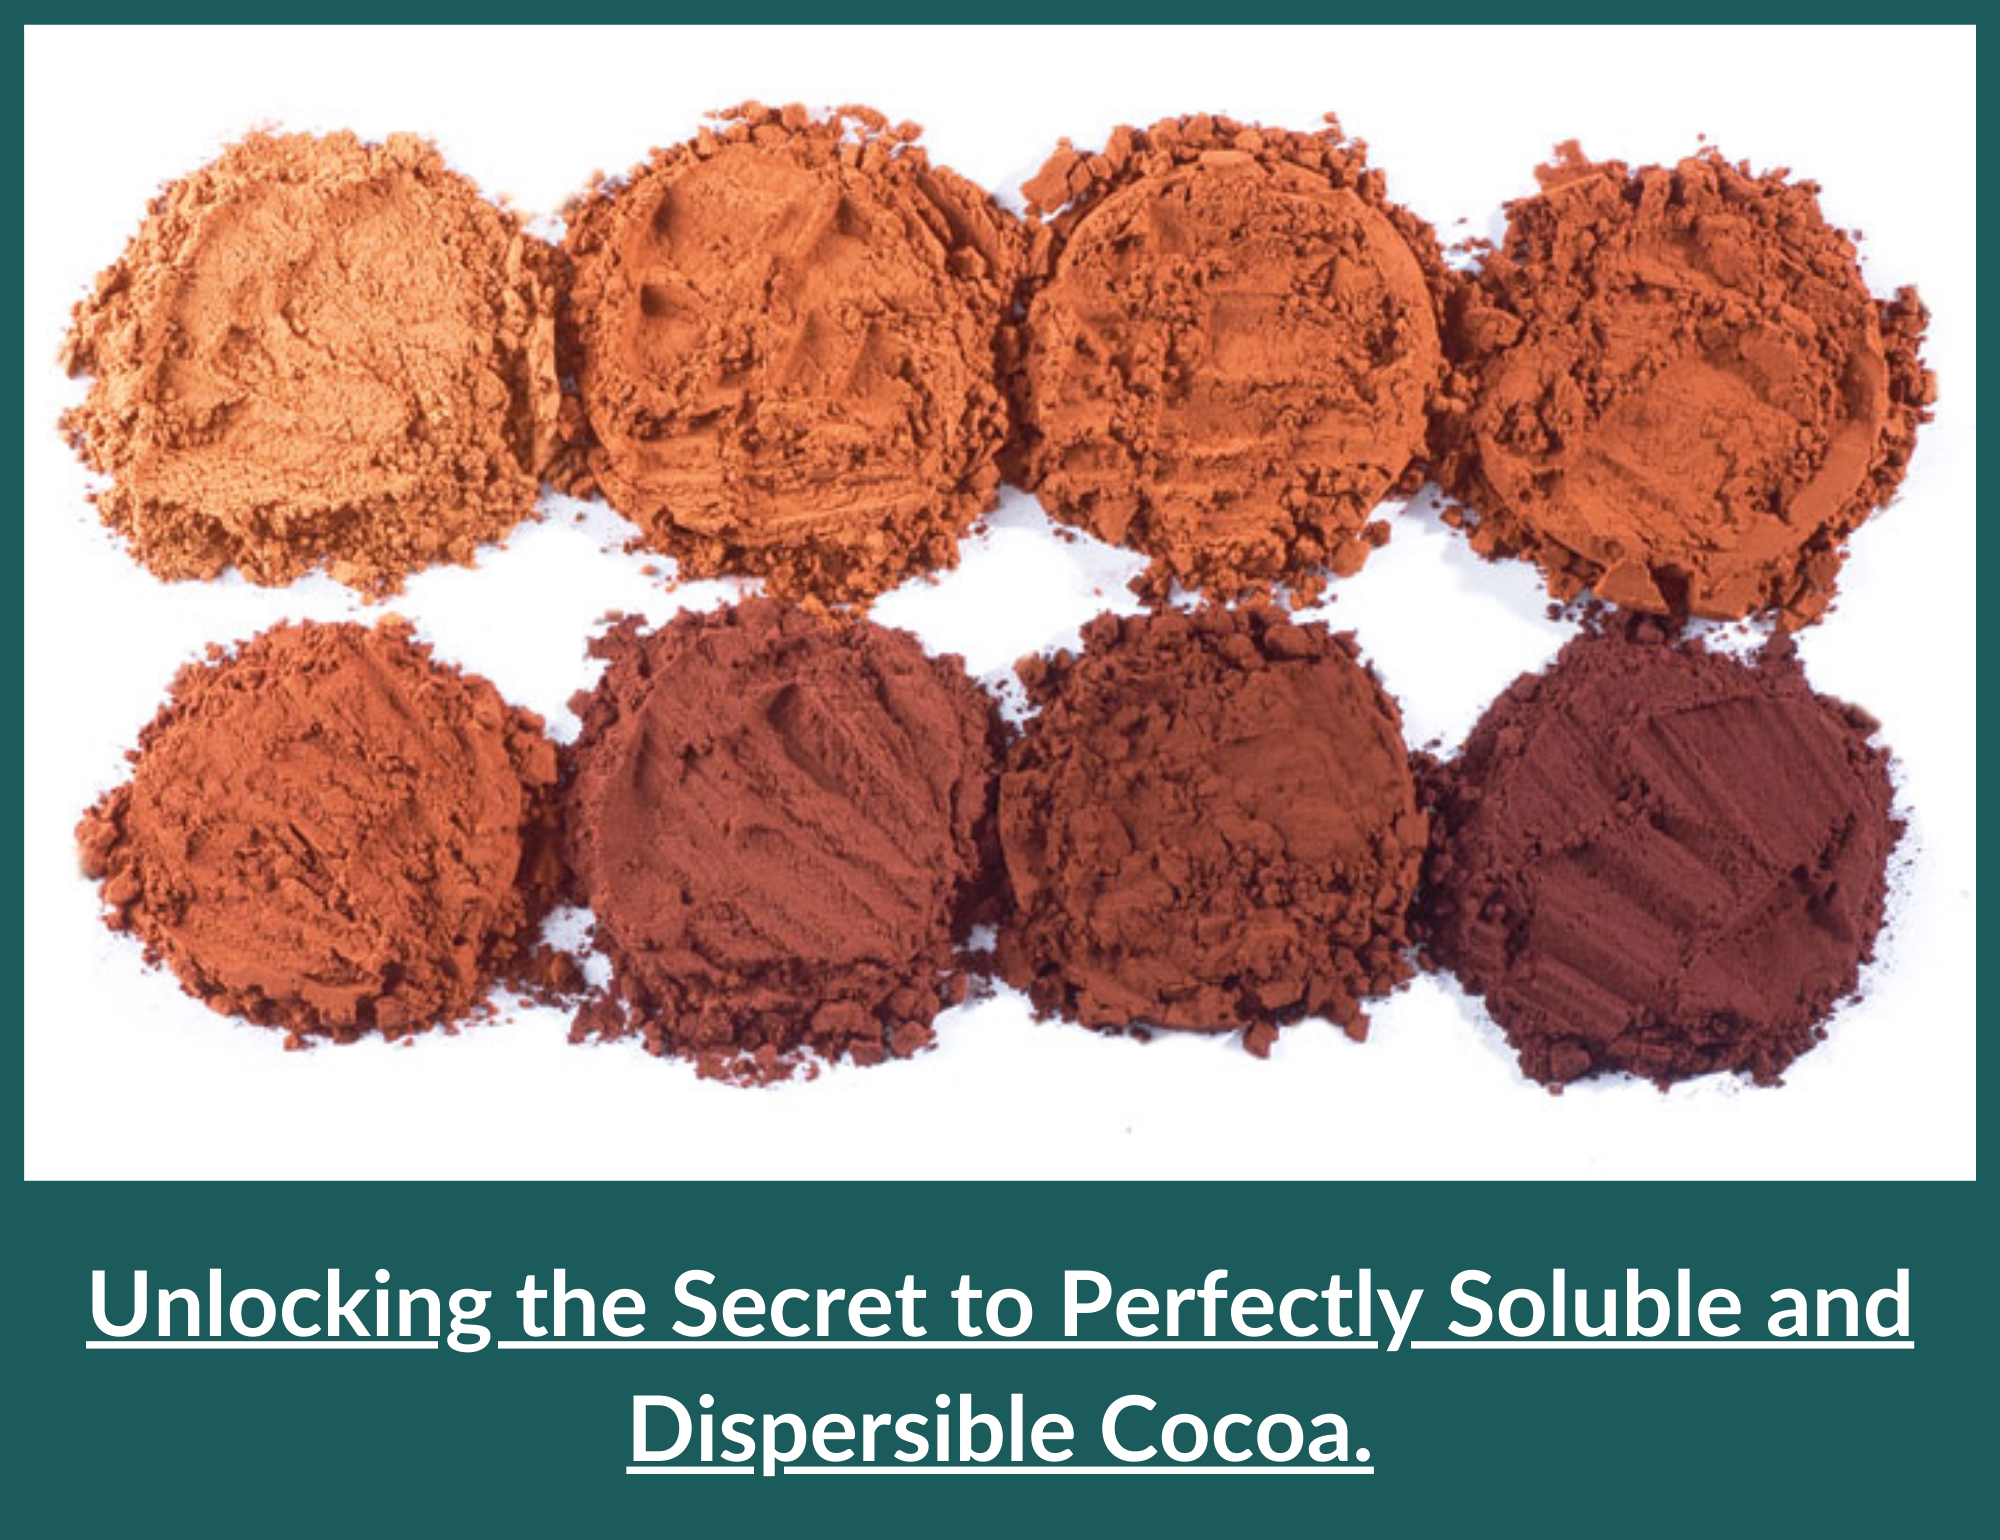 Solubility of Cocoa